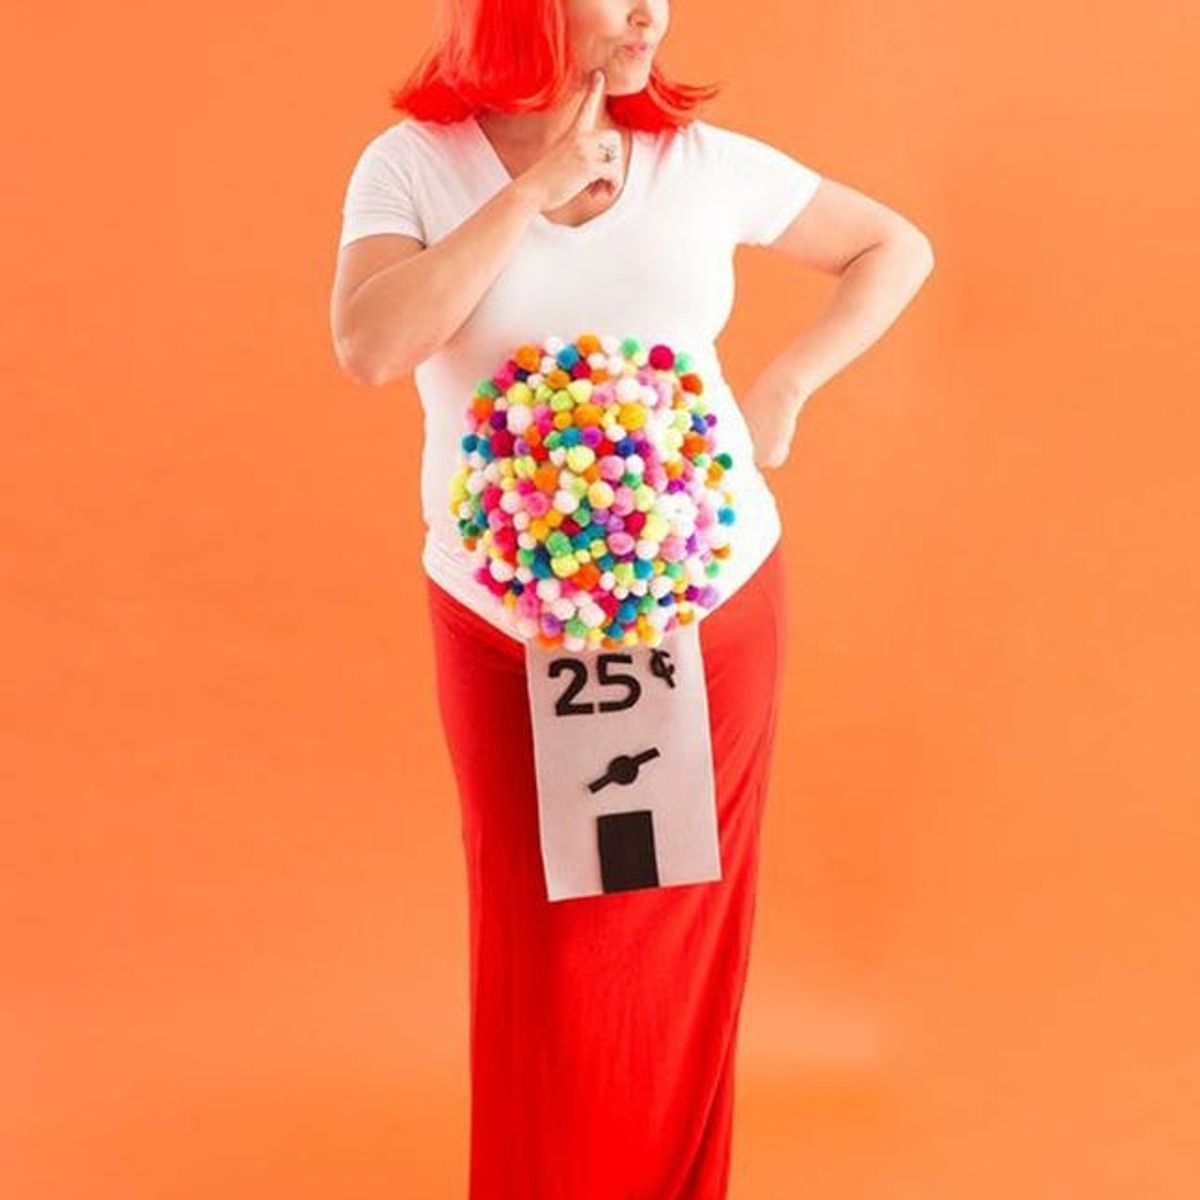 16 Pregnant Halloween Costumes You Can DIY - Brit + Co